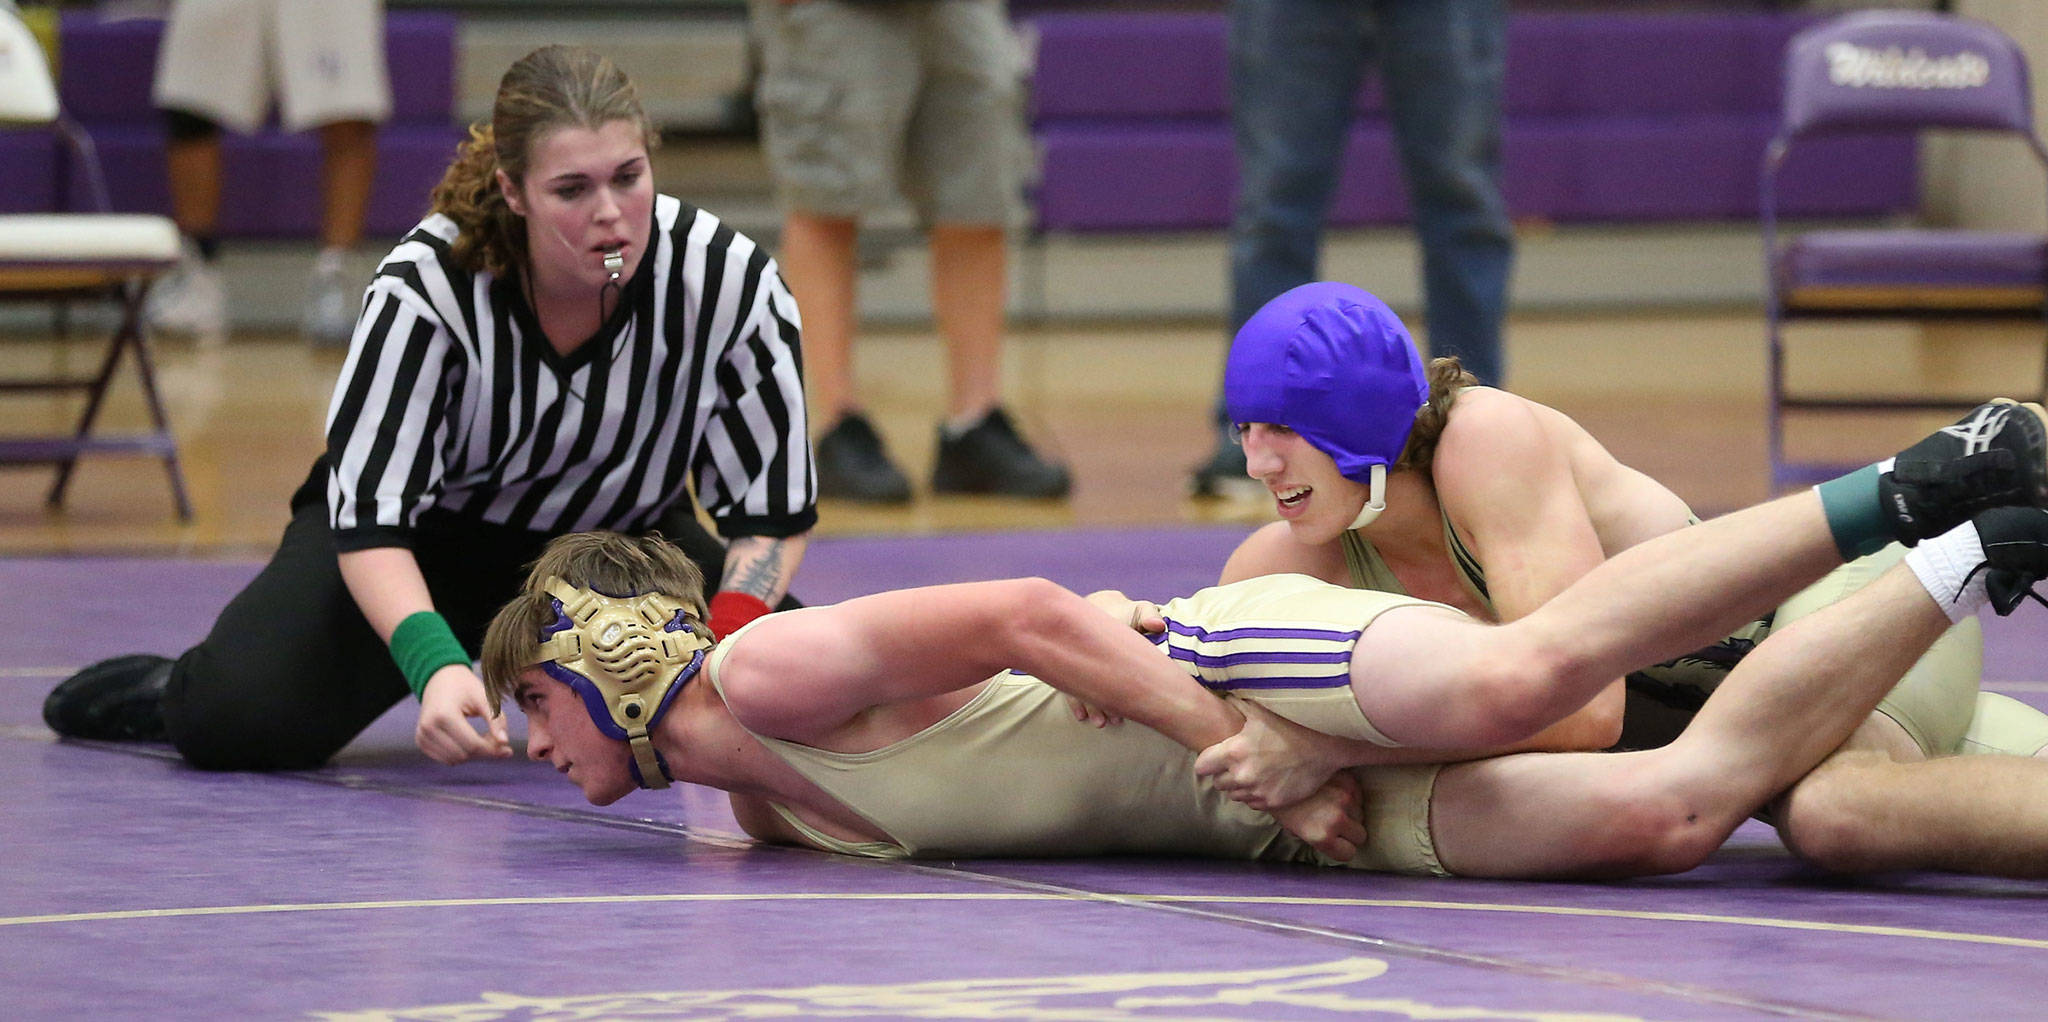 Ethan Pace, right, takes control in his match with Josh Simmons as official Meredith Bain looks on.(Photo by John Fisken)